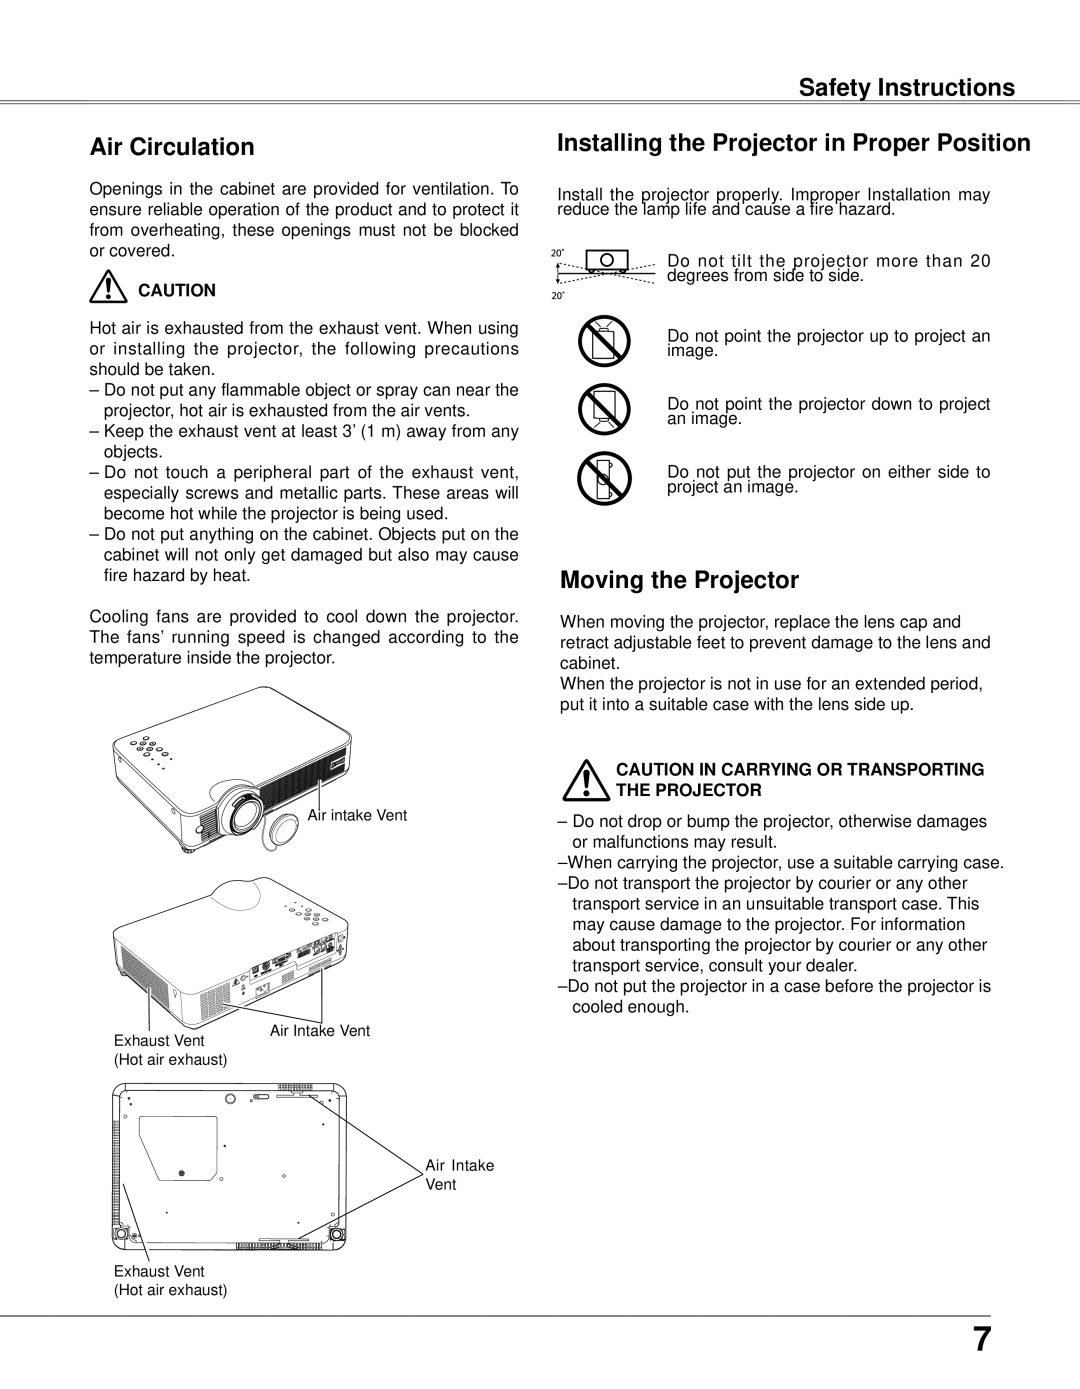 Eiki LC-XB33N Safety Instructions, Air Circulation, Moving the Projector, Installing the Projector in Proper Position 